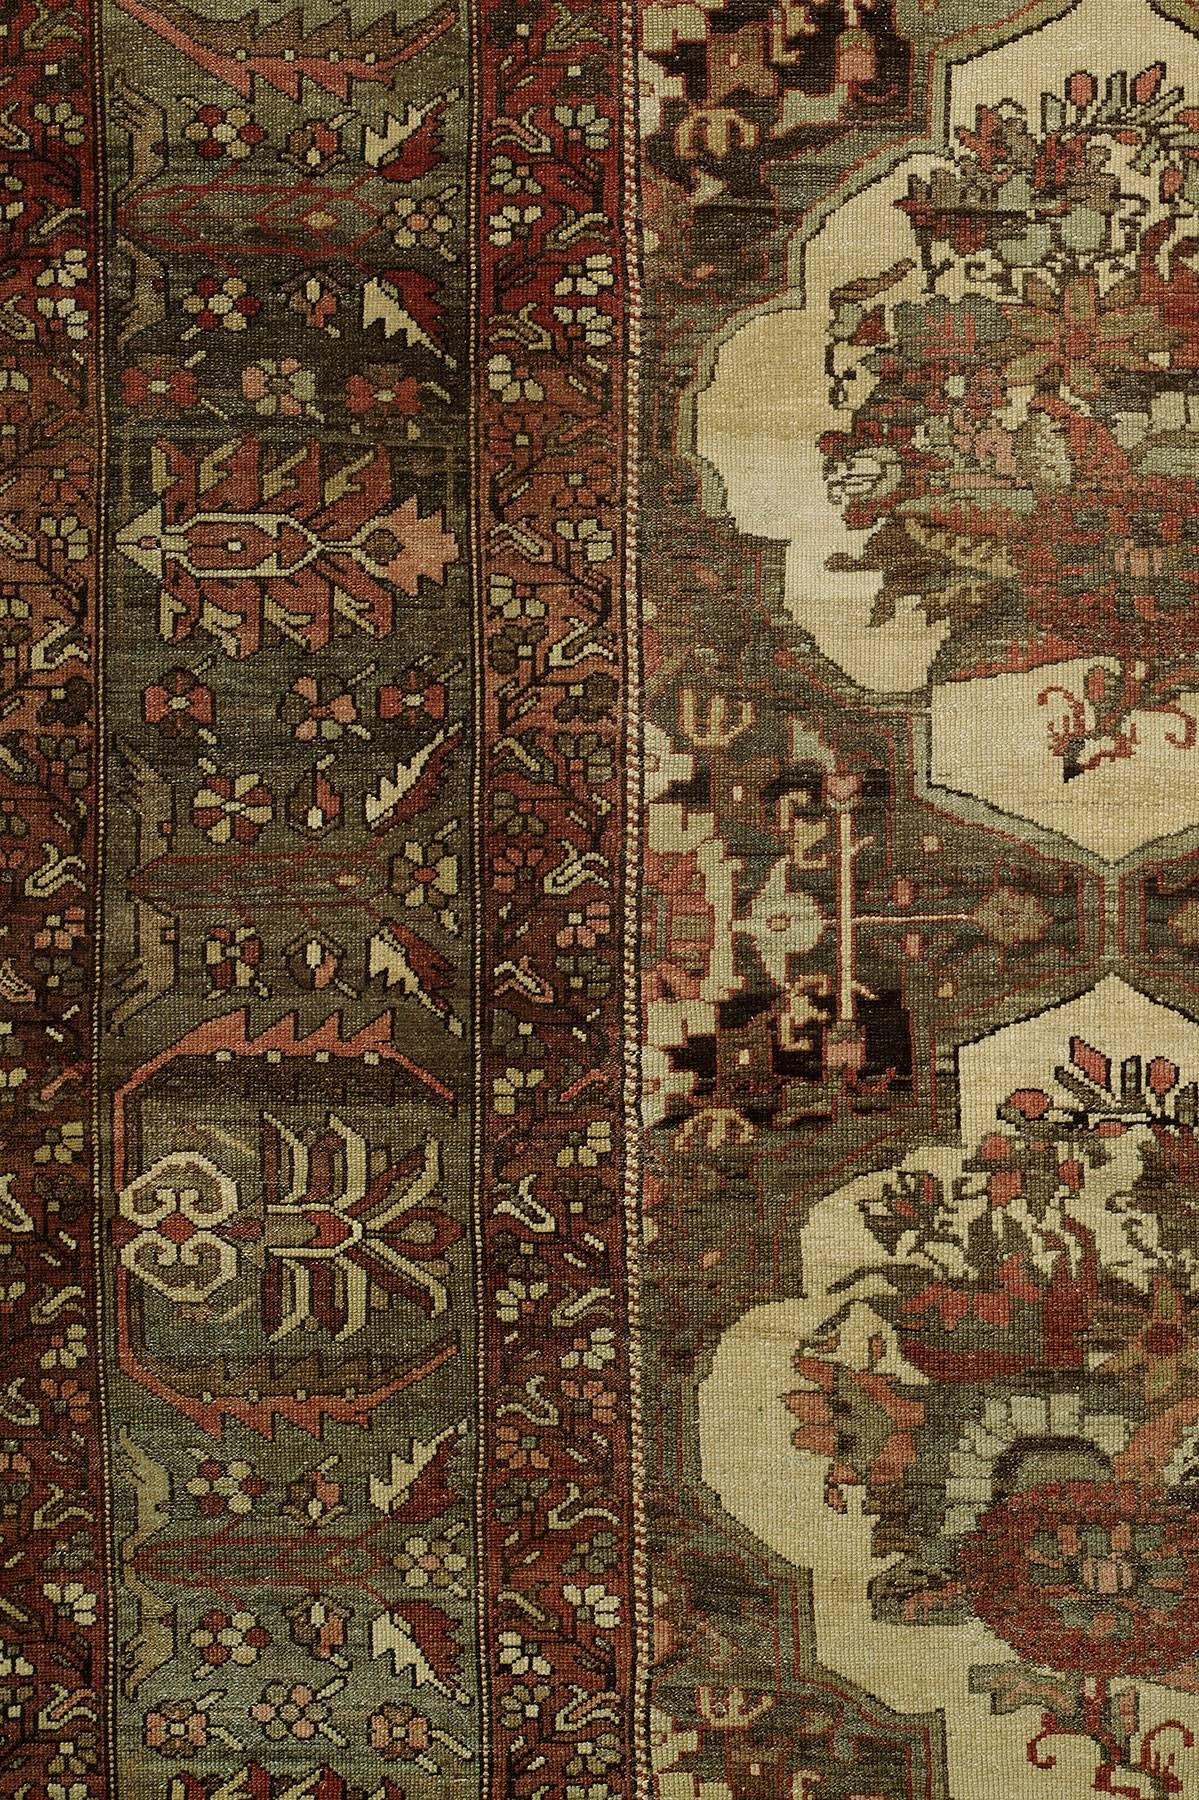 Oversized Persian Bakhtiari carpet with a repetitive all-over floral motif.

Until the 1930s Bakhtiari rugs were characteristically woven for use by the tribe or on commission within Iran. As they were rarely produced to be exported, they offer